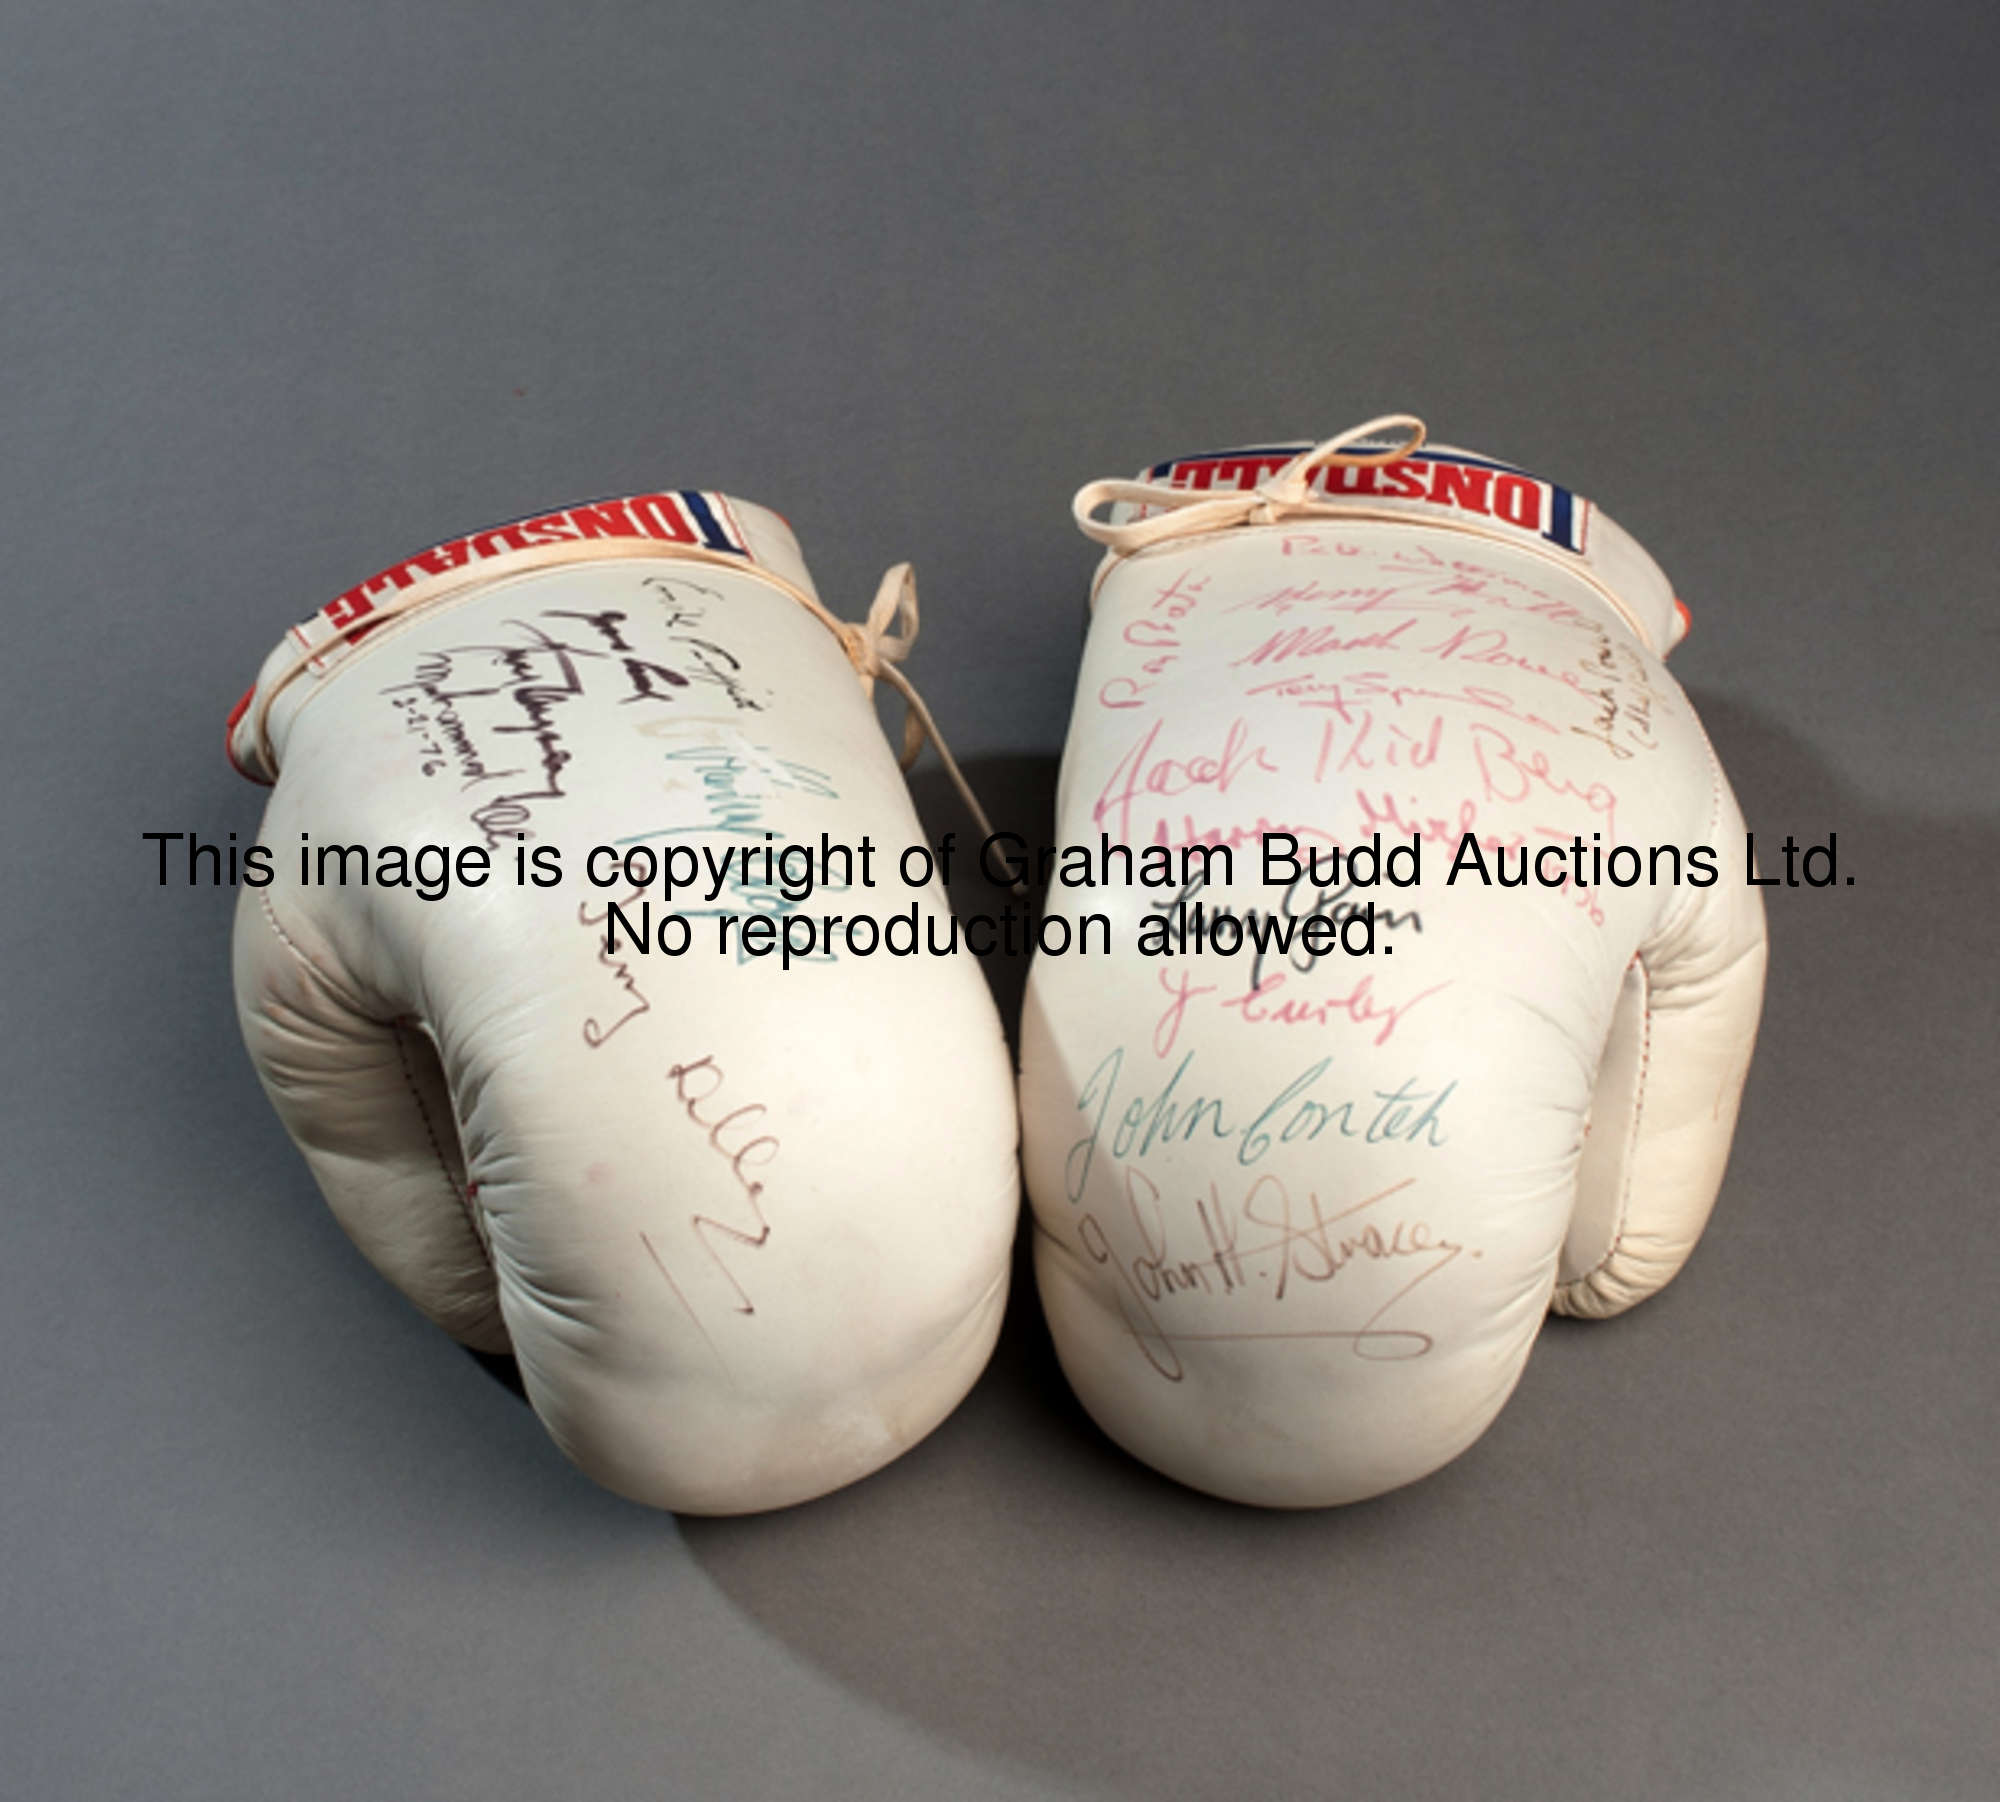 Multi-signed pair of boxing gloves, white Lonsdale gloves signed on what appears to be a significant...